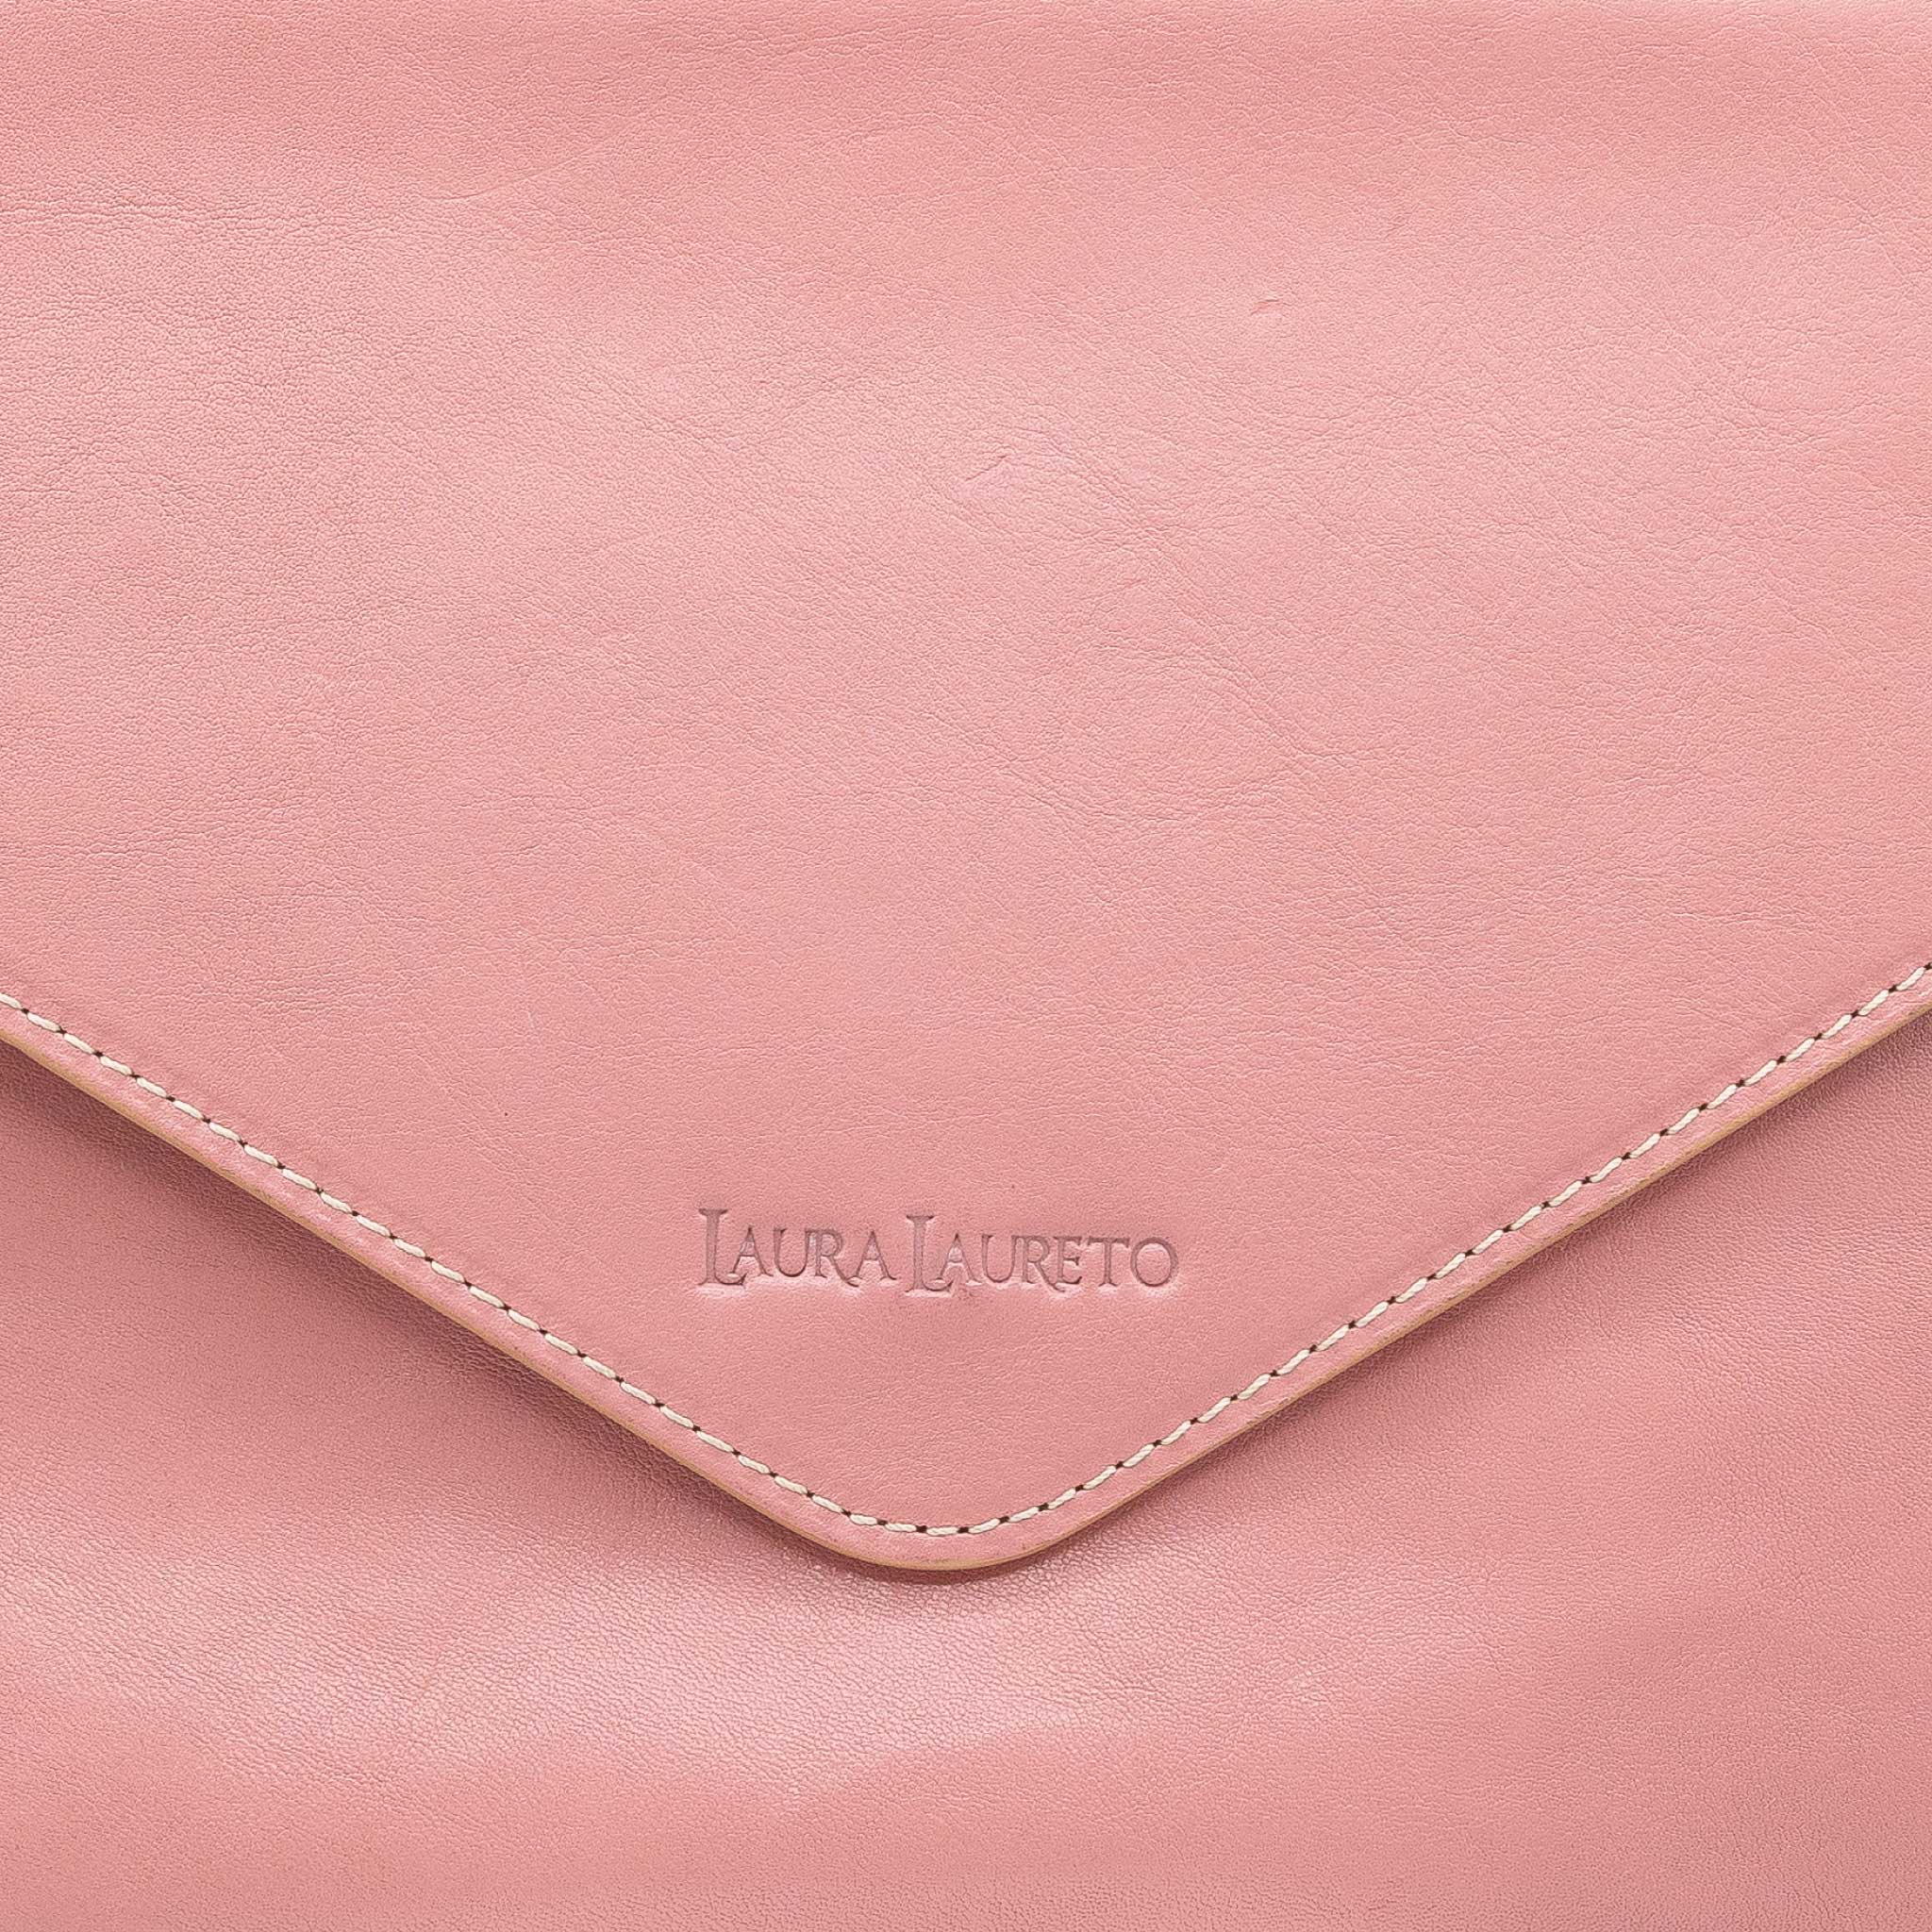 The Iconic Envelope Bag®